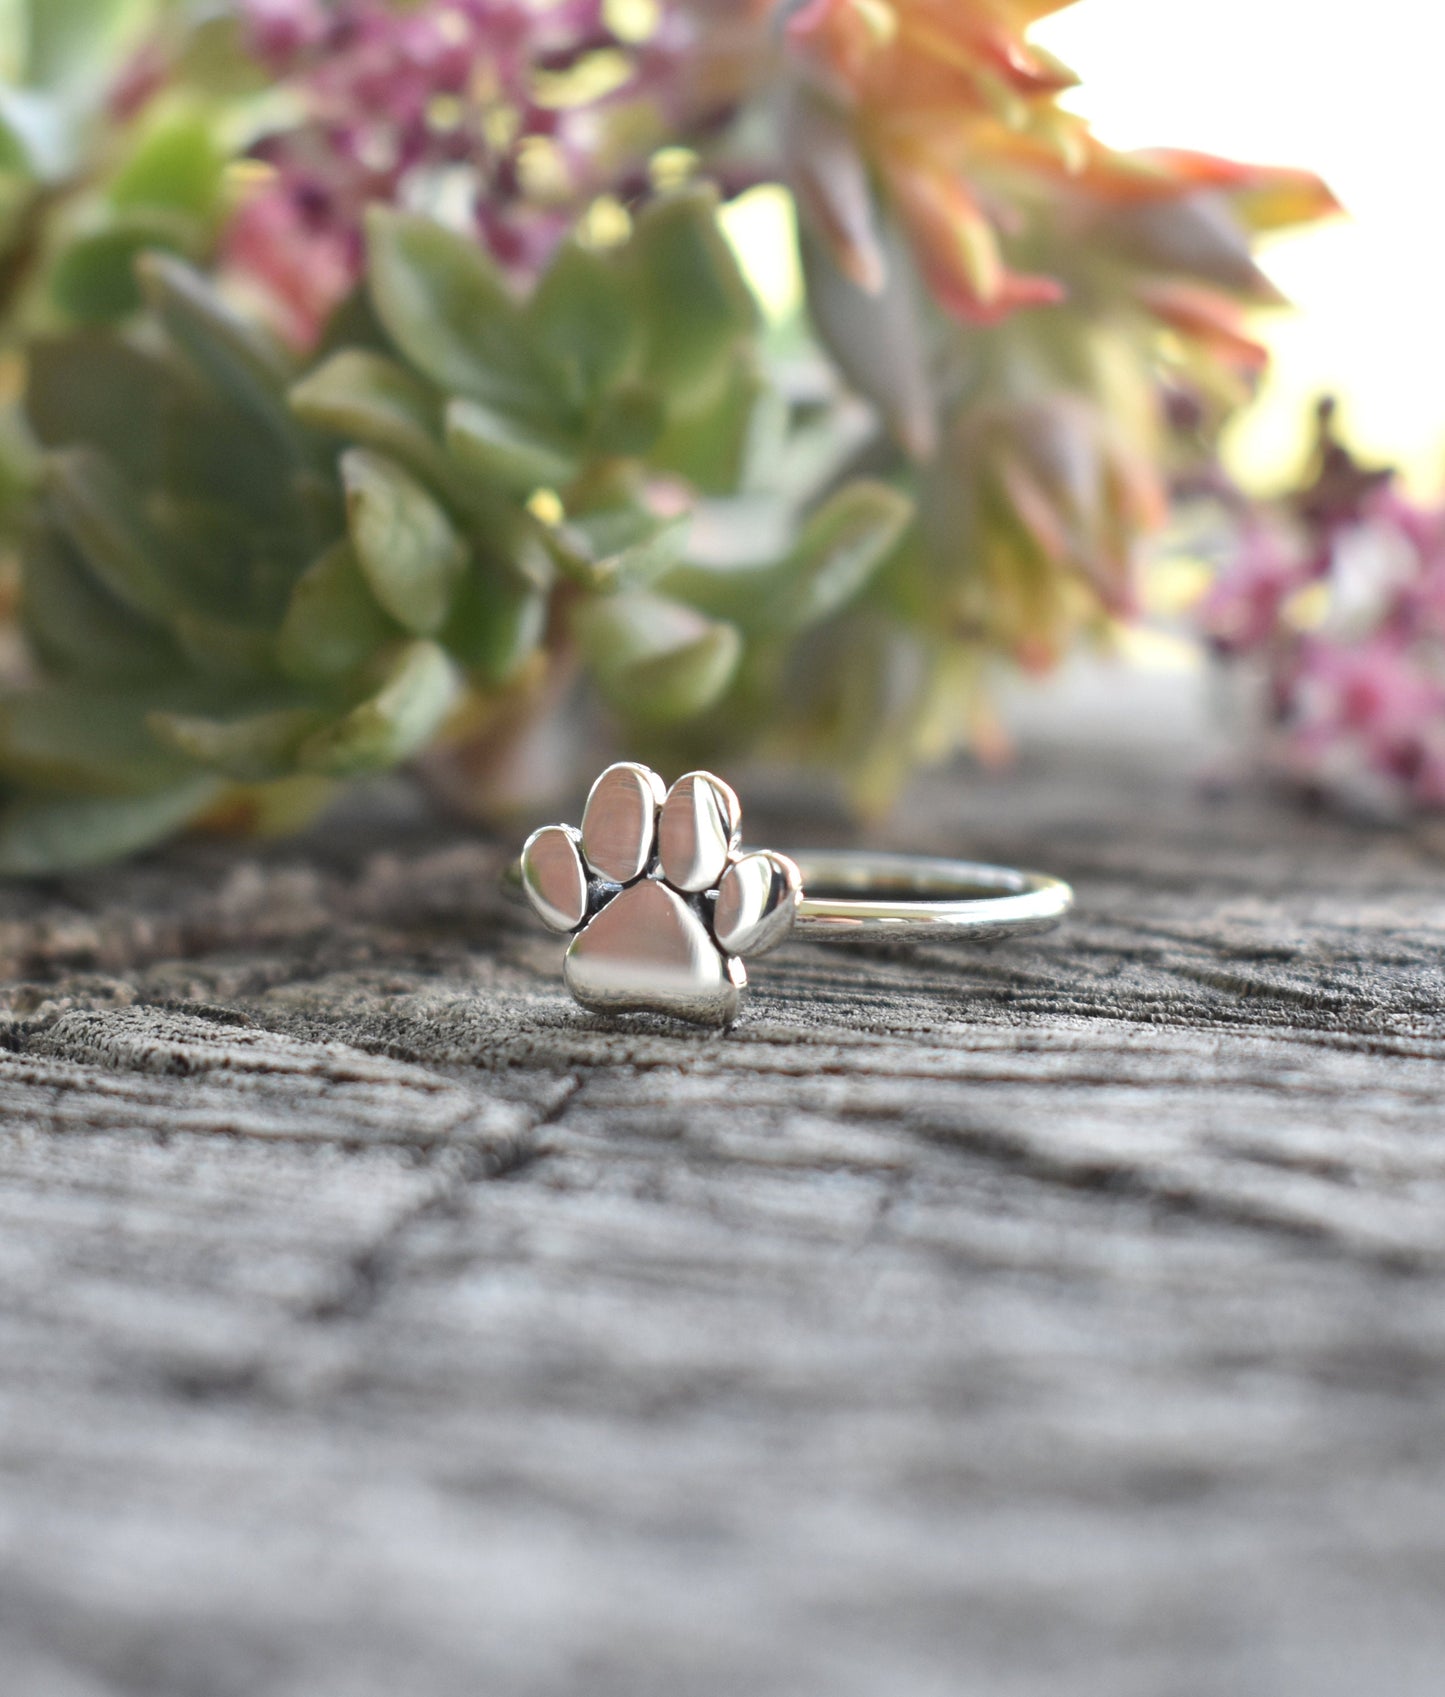 Paw Ring- Dog Paw Ring, Silver Pet Ring- Dog Lovers, Cat Lovers